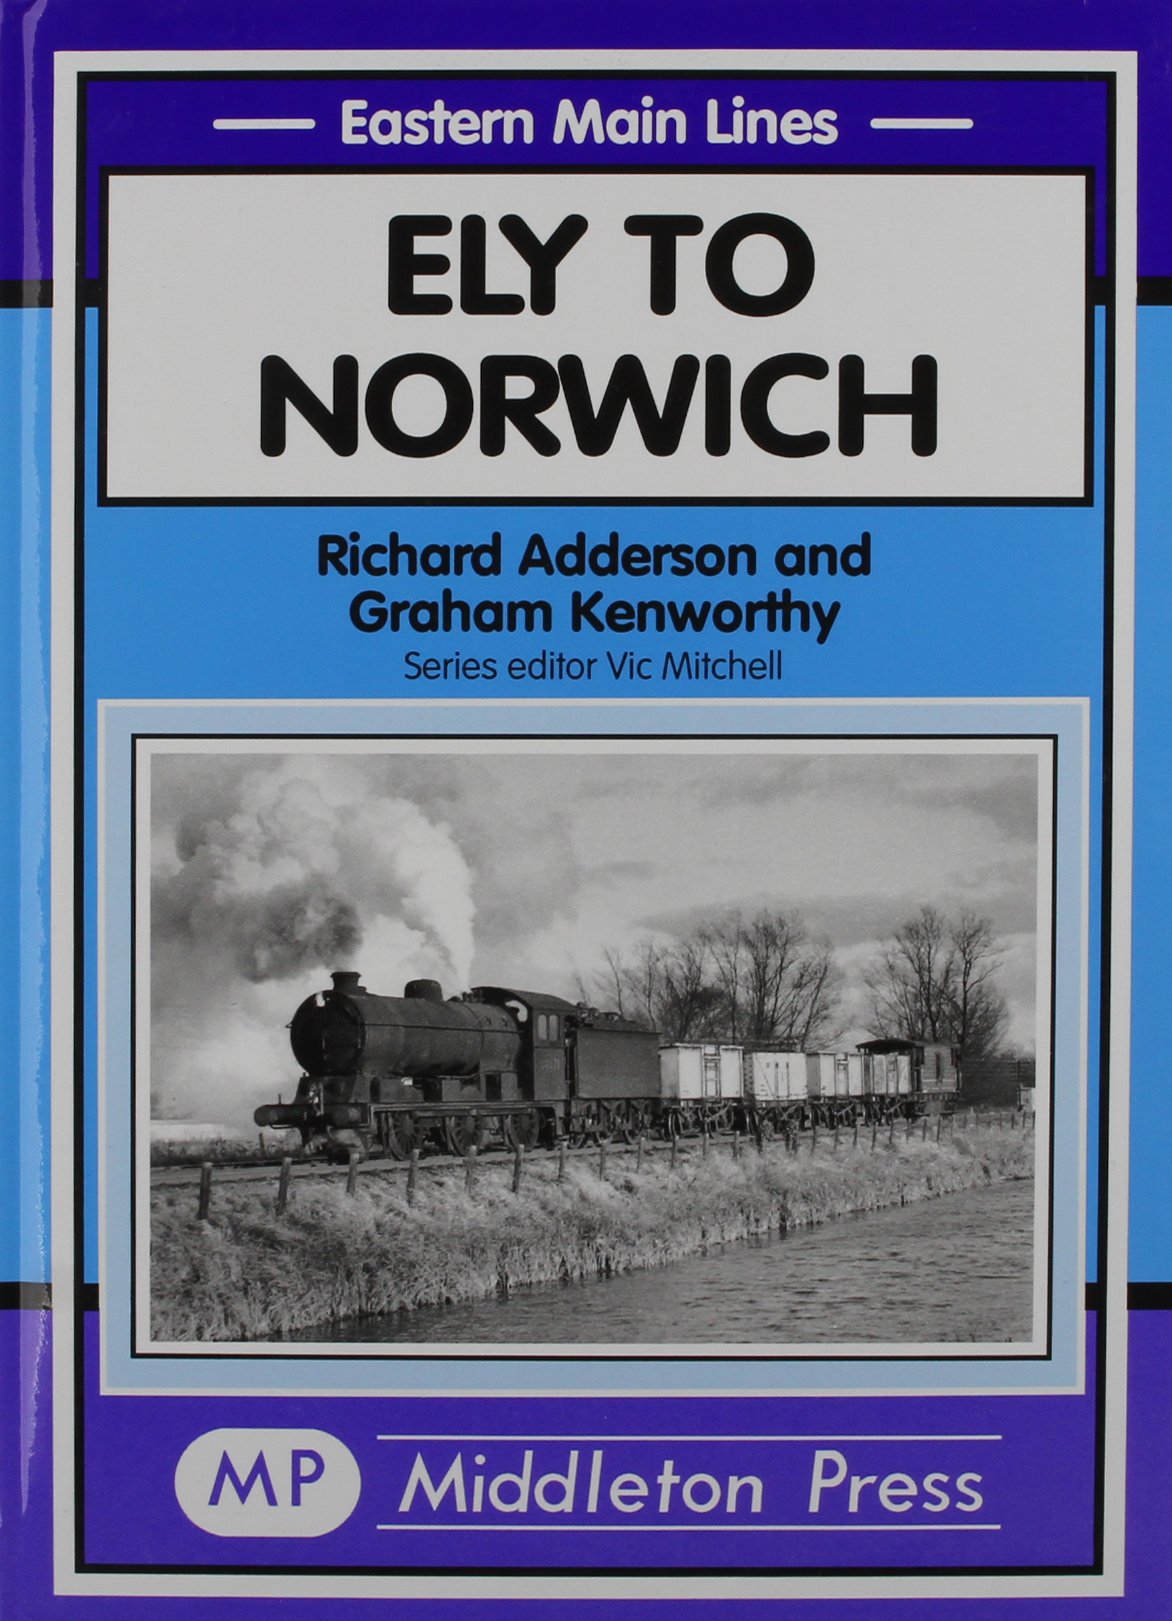 Eastern Main Lines Ely to Norwich